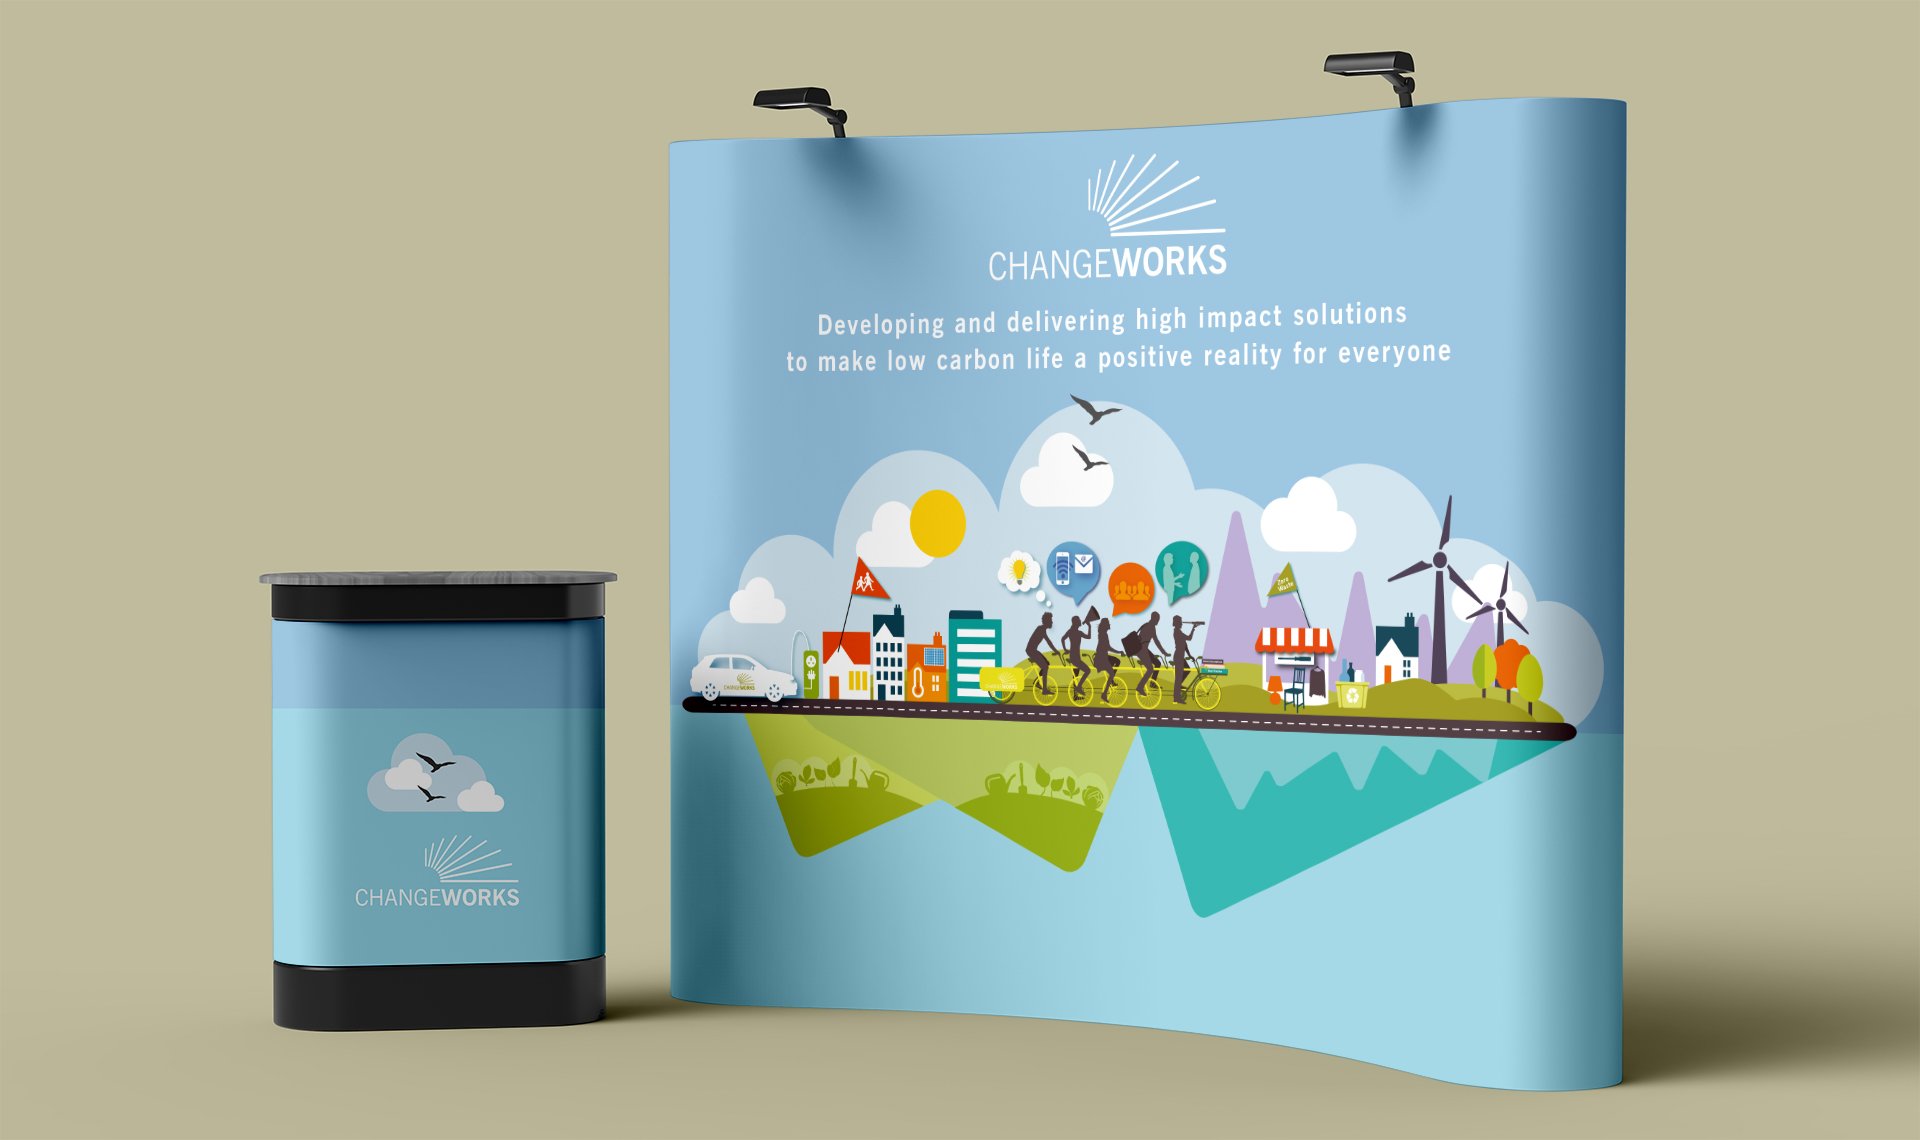 Change works stand for outdoor events and shows